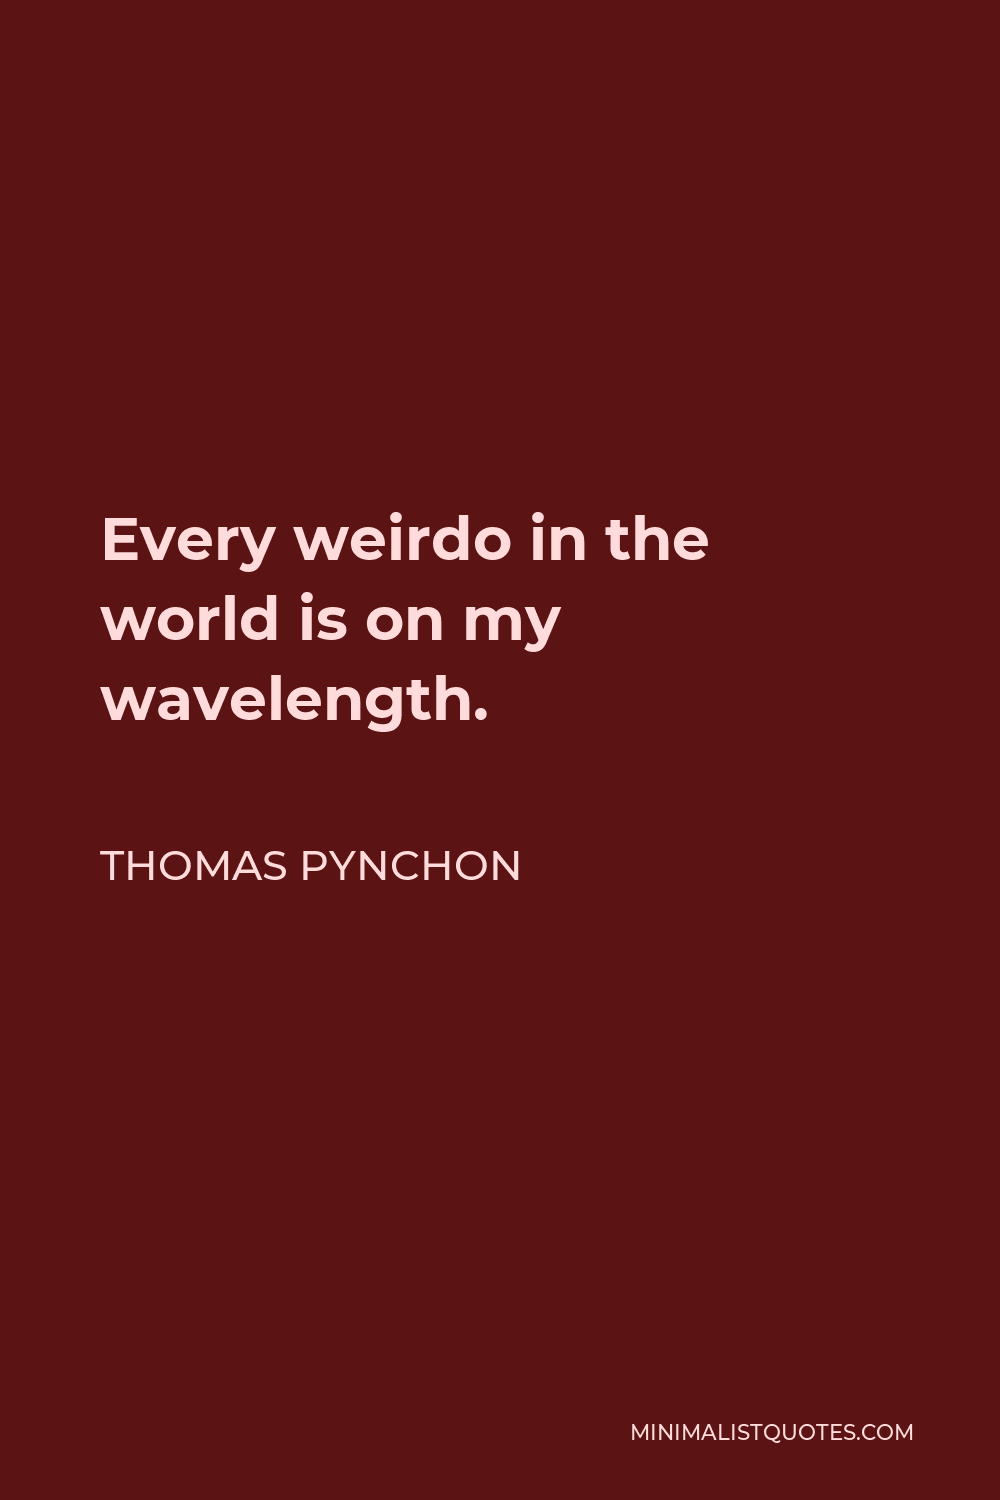 Thomas Pynchon Quote: Every Weirdo In The World Is On My Wavelength.